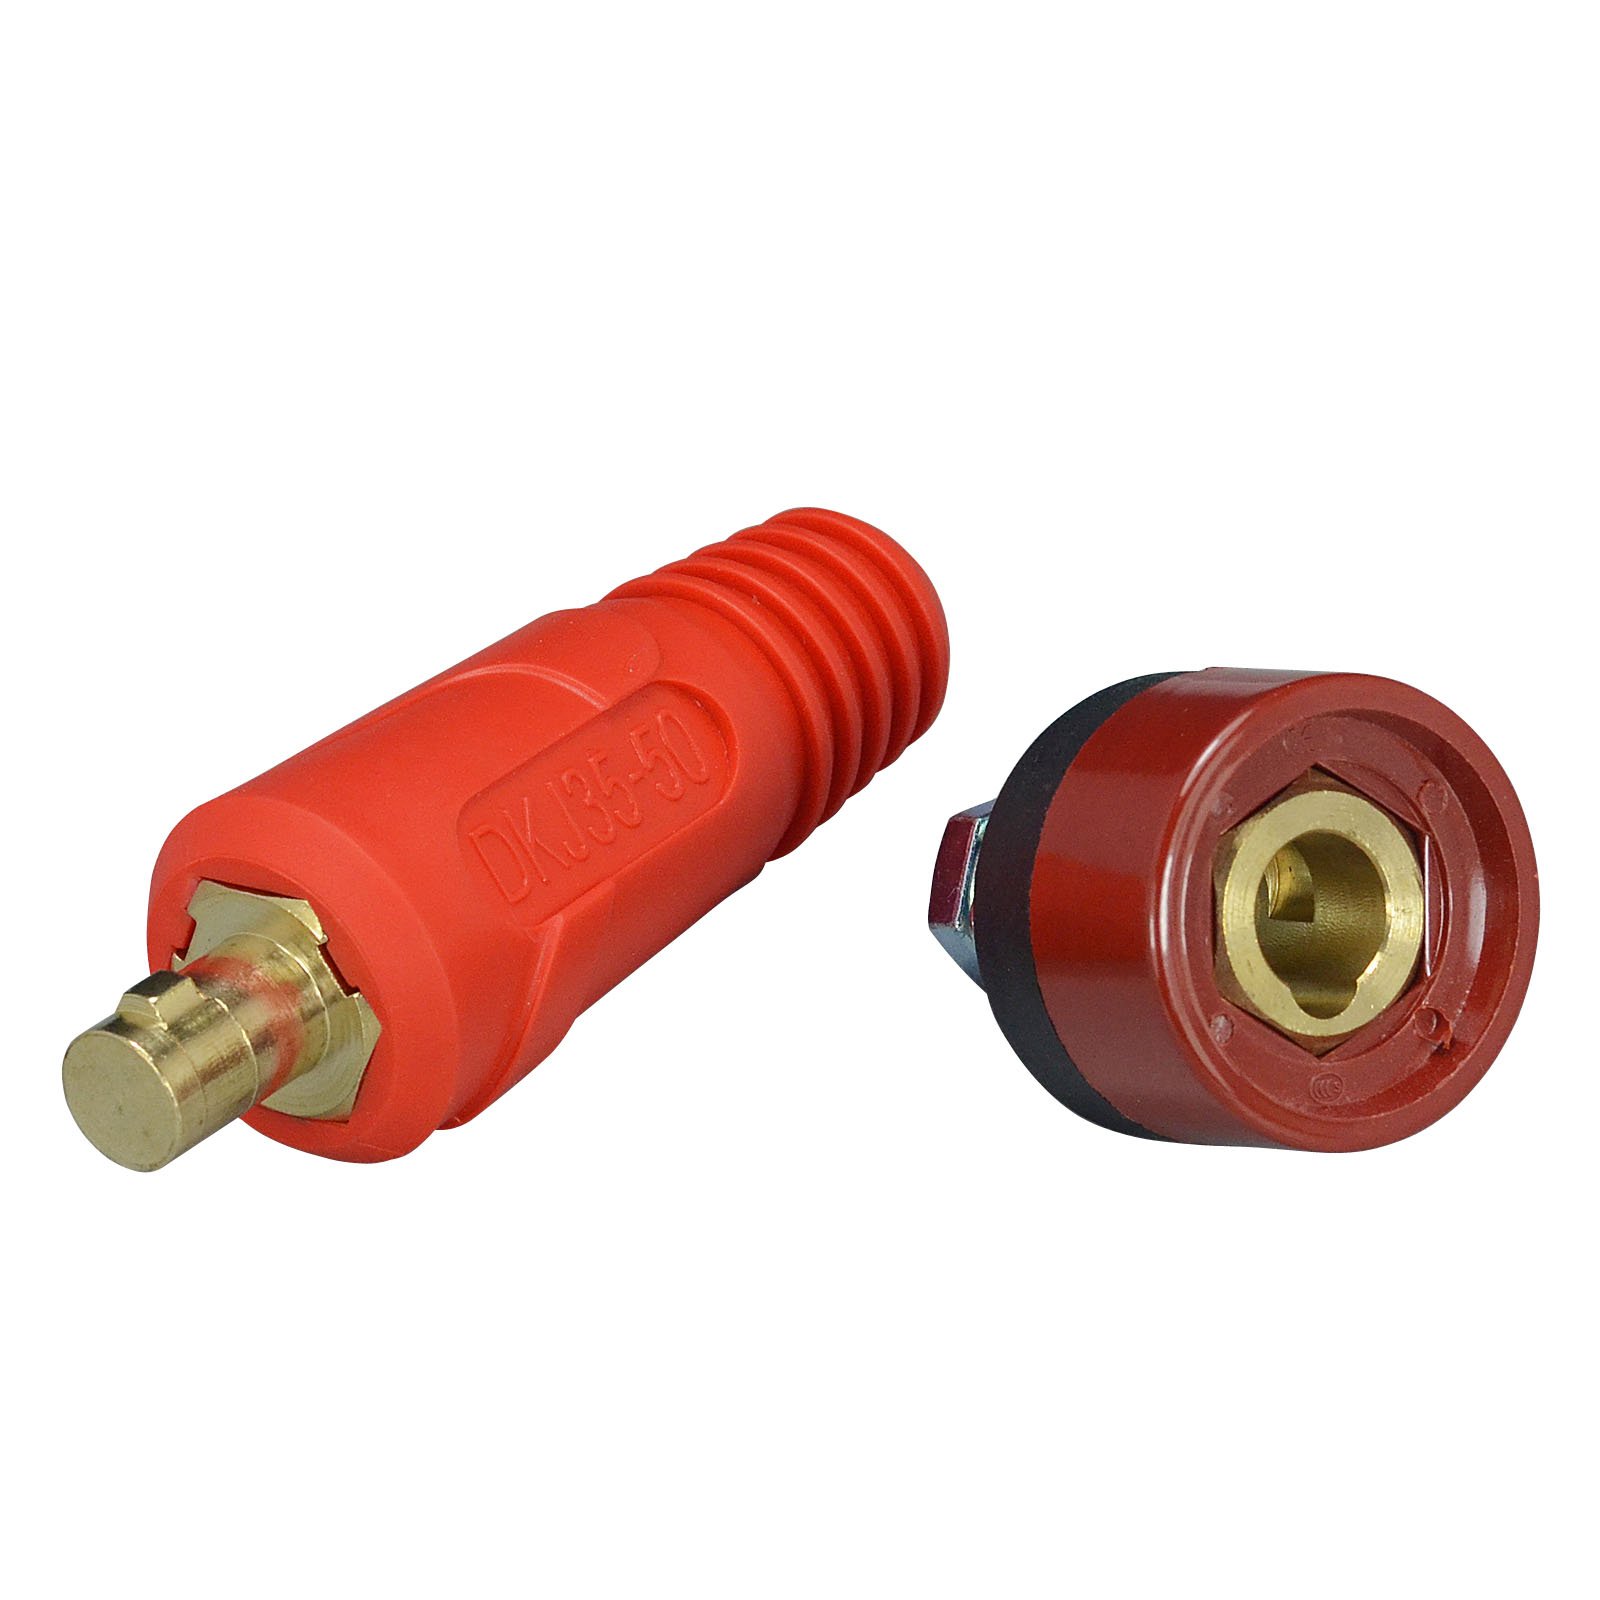 RIVERWELD TIG Welding Cable Panel Connector-plug and Socket Dinse Dinze Quick Fitting (4, DKJ35-50 & DKZ35-50)